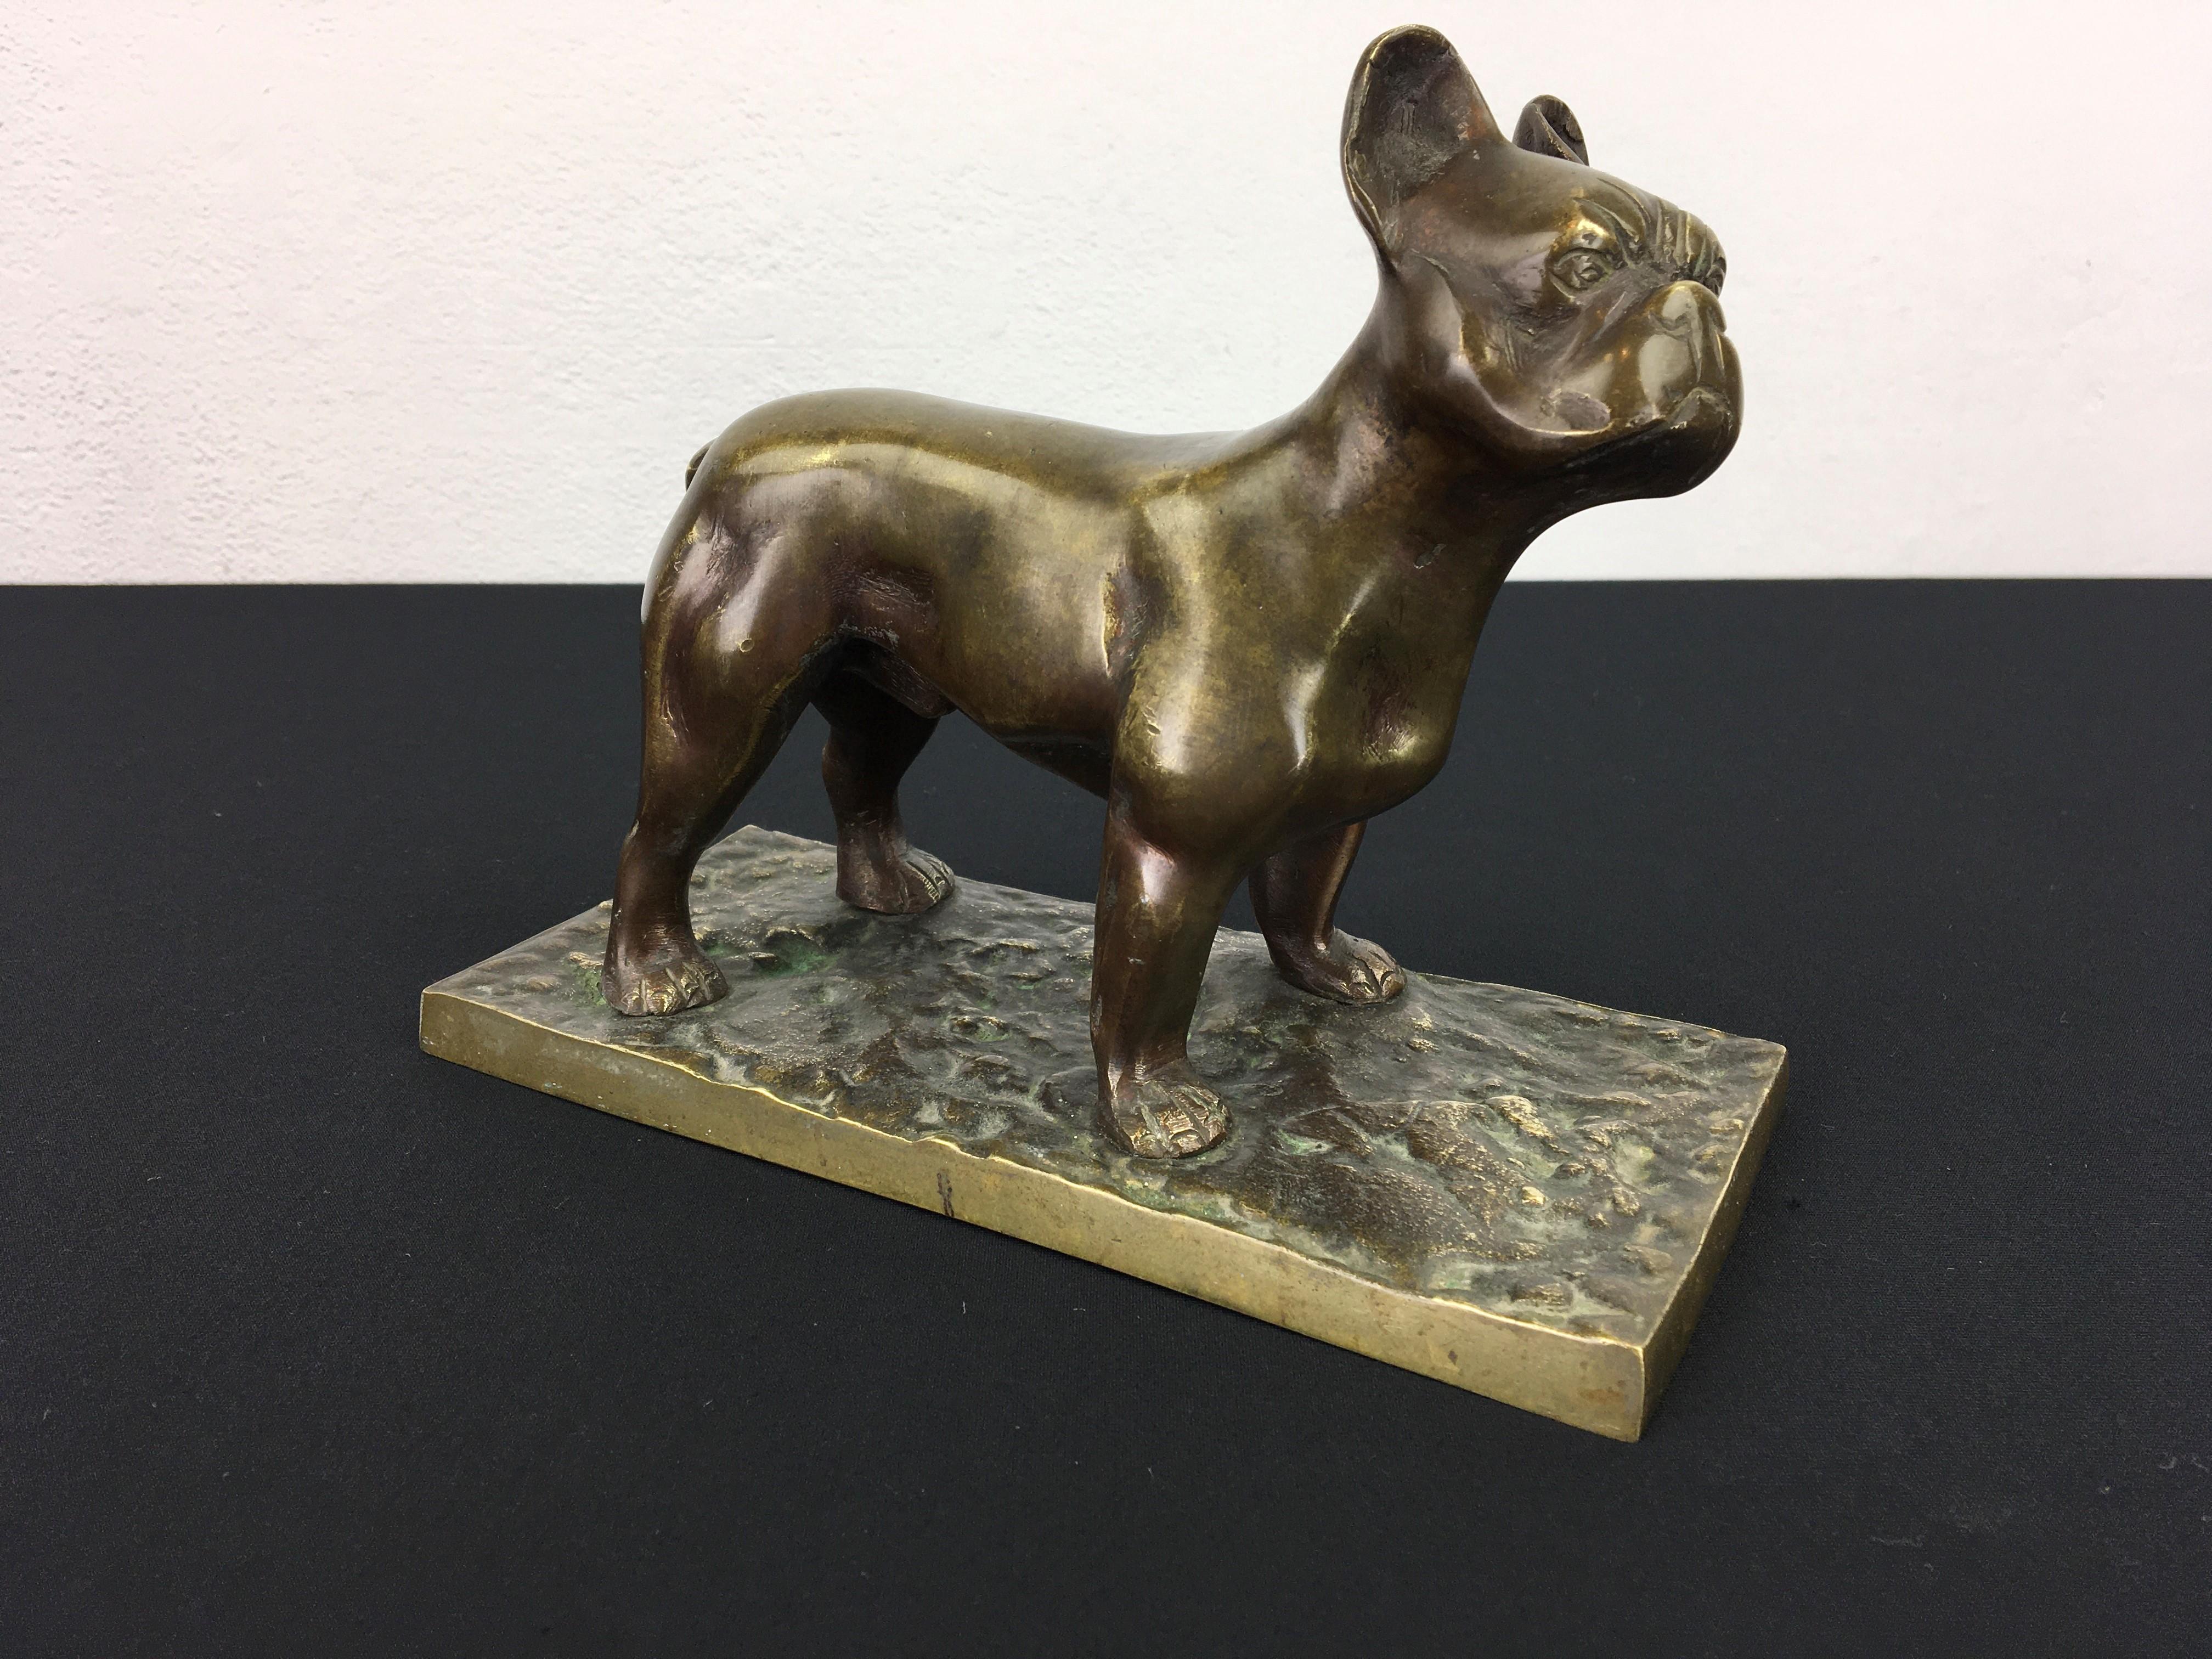 Bronze French Bulldog sculpture. 
This heavy dog sculpture made of cast bronze is not small, see the picture on my hand ! 
It's a standing male Frenchie mounted on a base which is also made of cast bronze.

French Bulldog - Frenchie - Bulldog